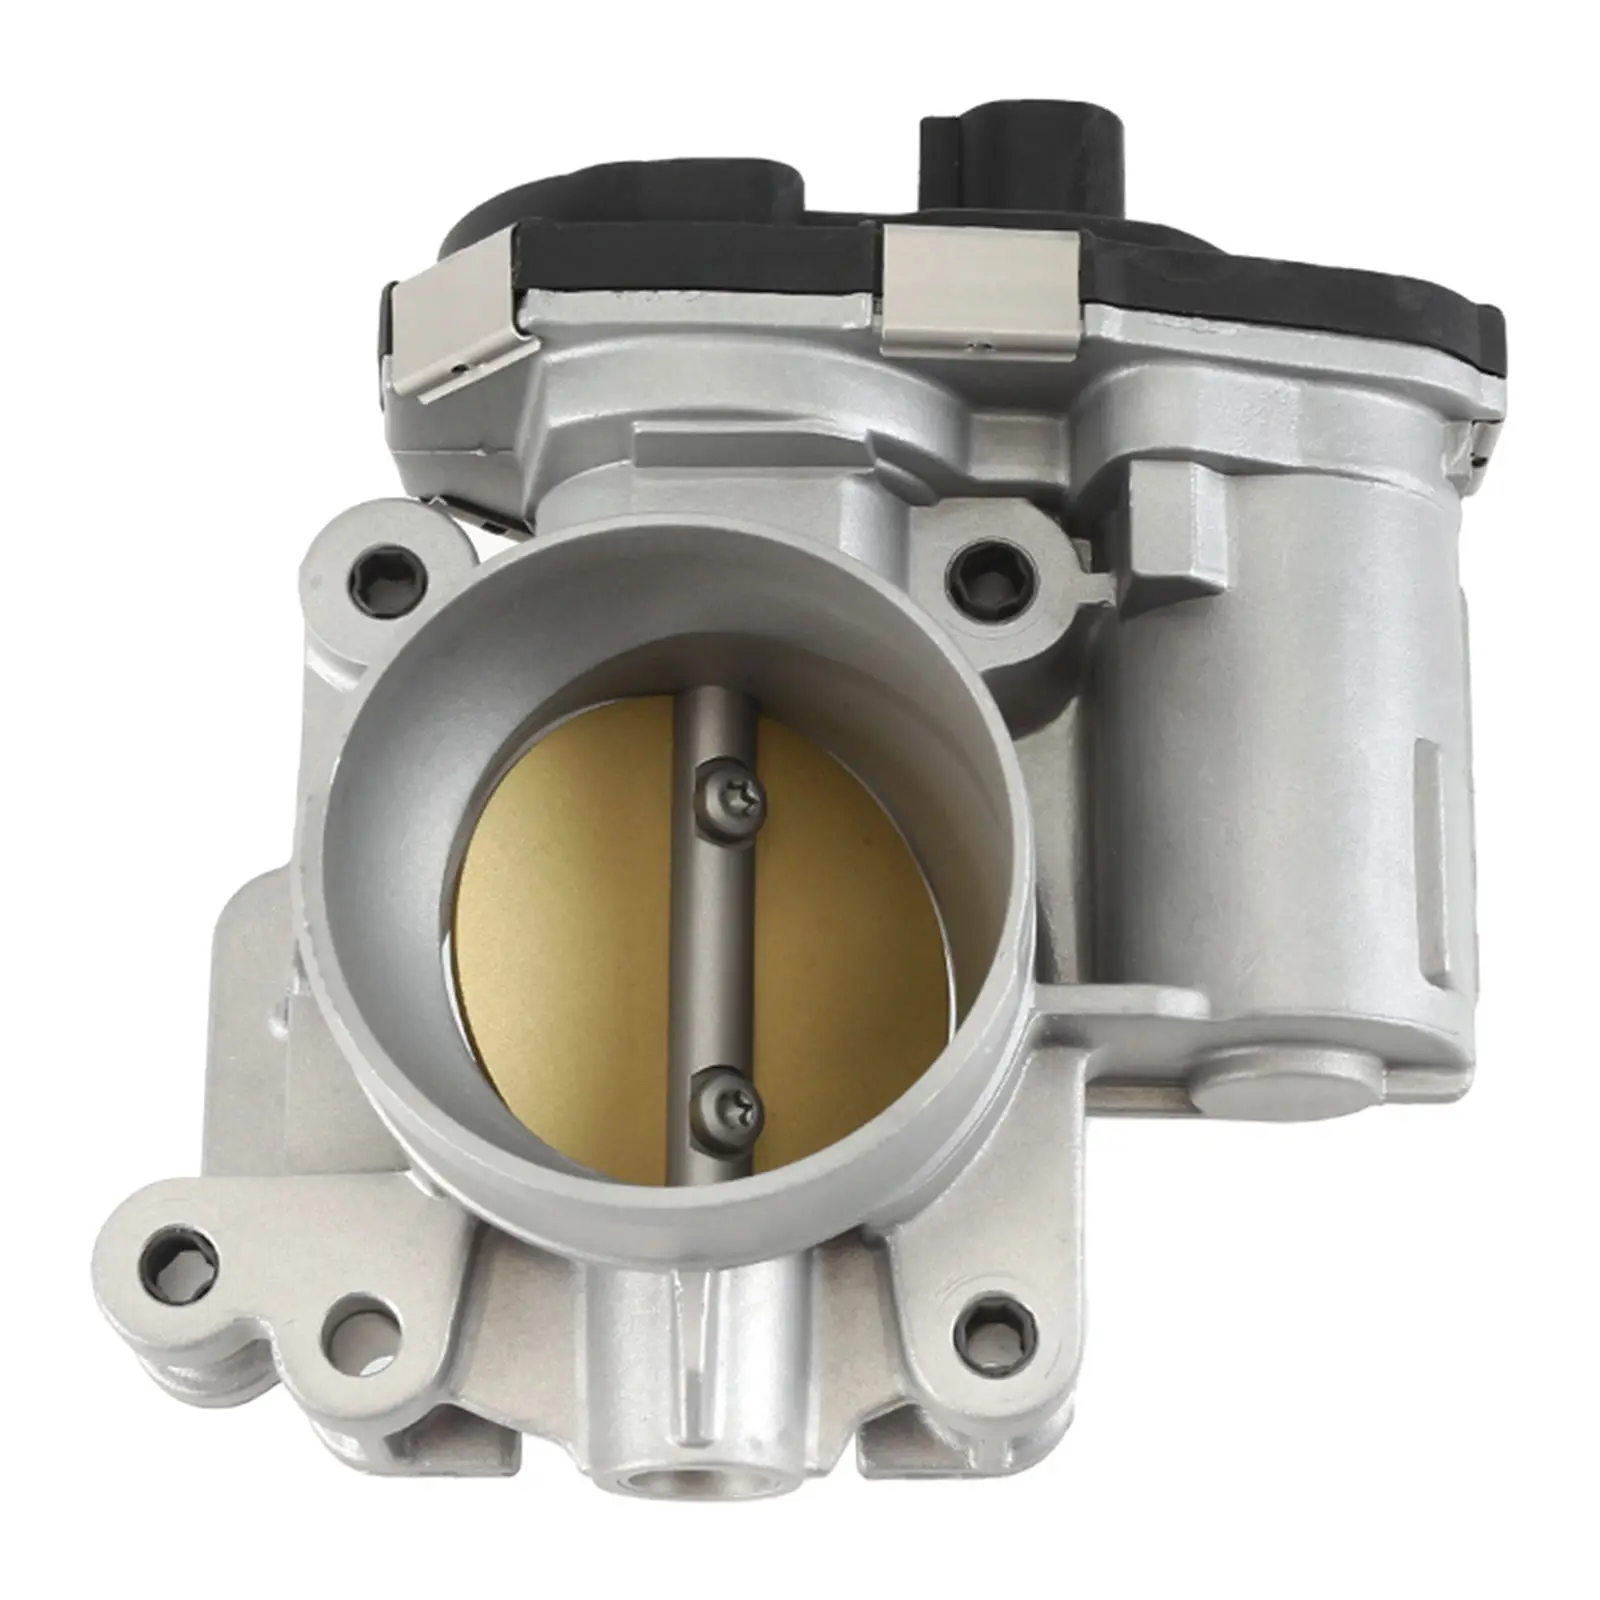 Throttle Body Valve Aembly TB1087 for  Regal 2.0 Turbocharged Engines